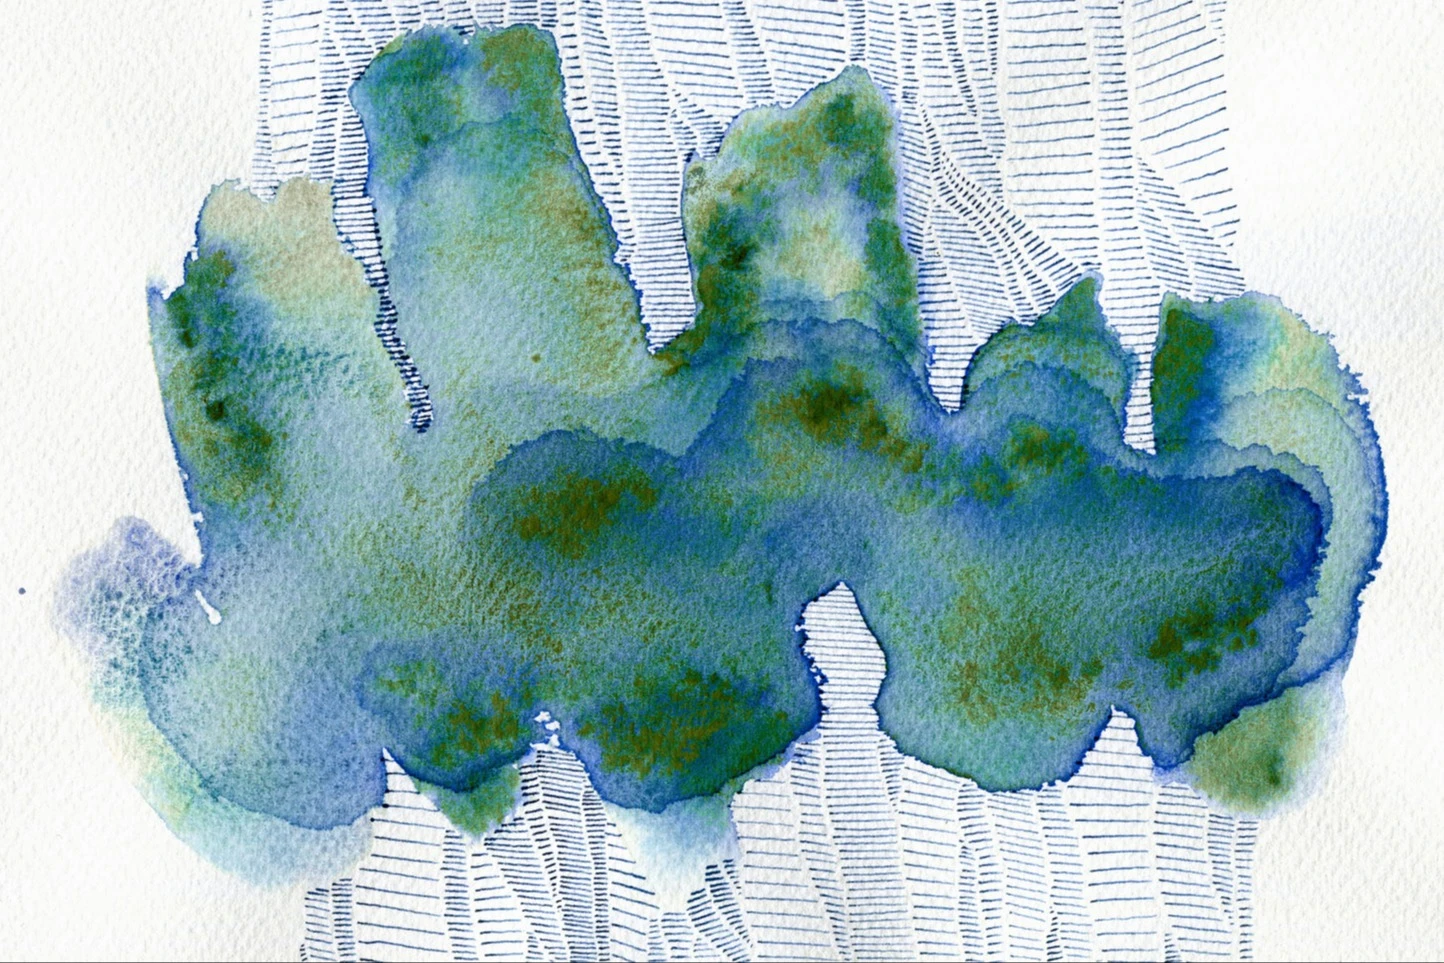 Watercolor abstraction in liquid shape in blues and greens on heavy paper. AW468